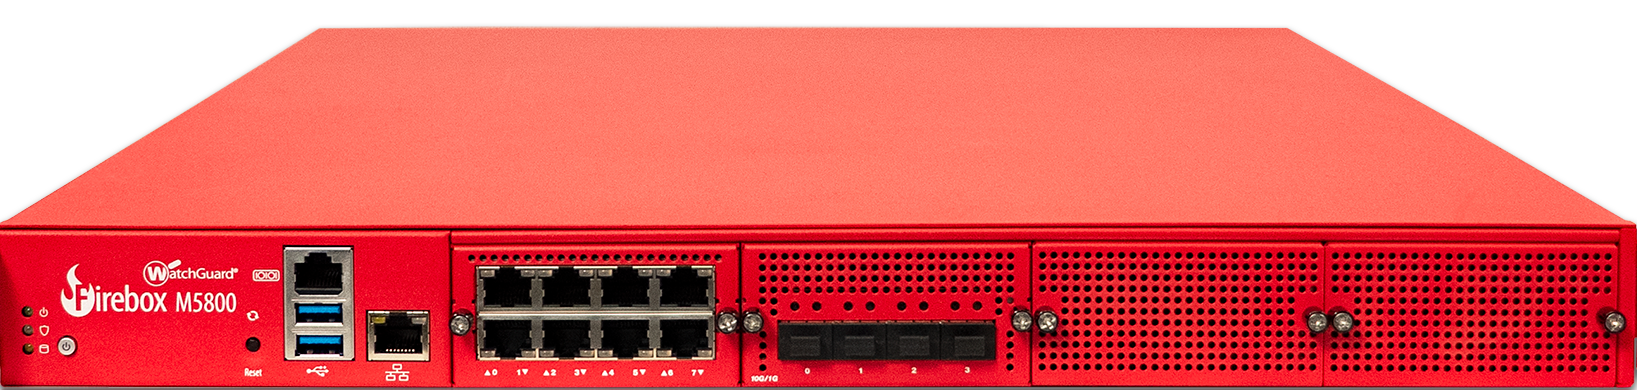 Picture of the front of the Firebox M5800